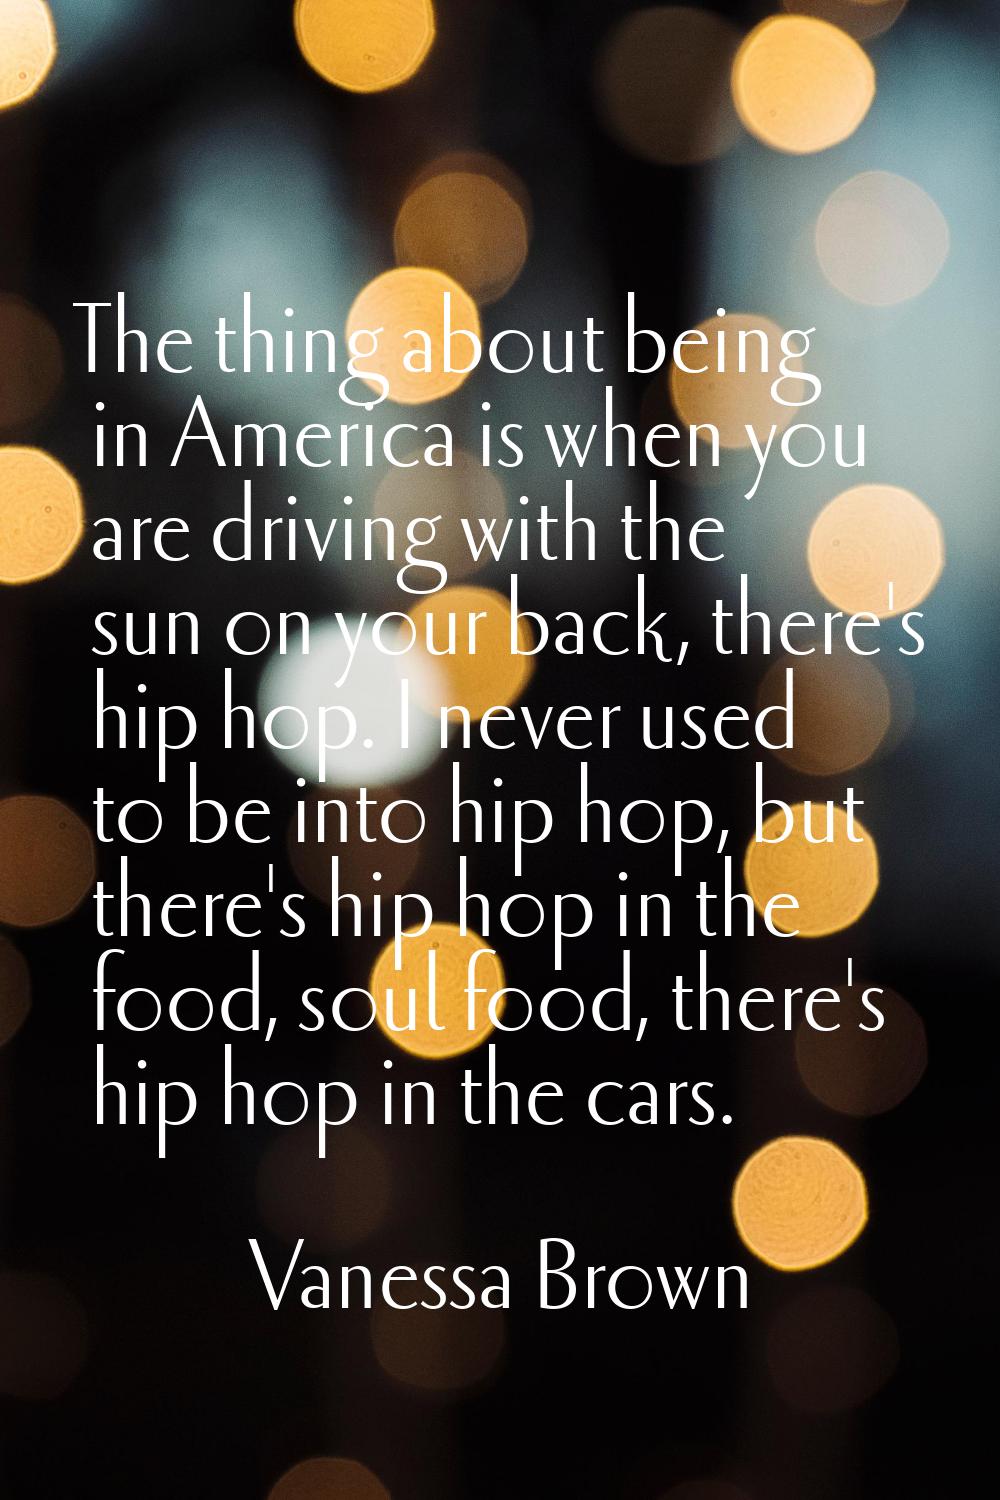 The thing about being in America is when you are driving with the sun on your back, there's hip hop